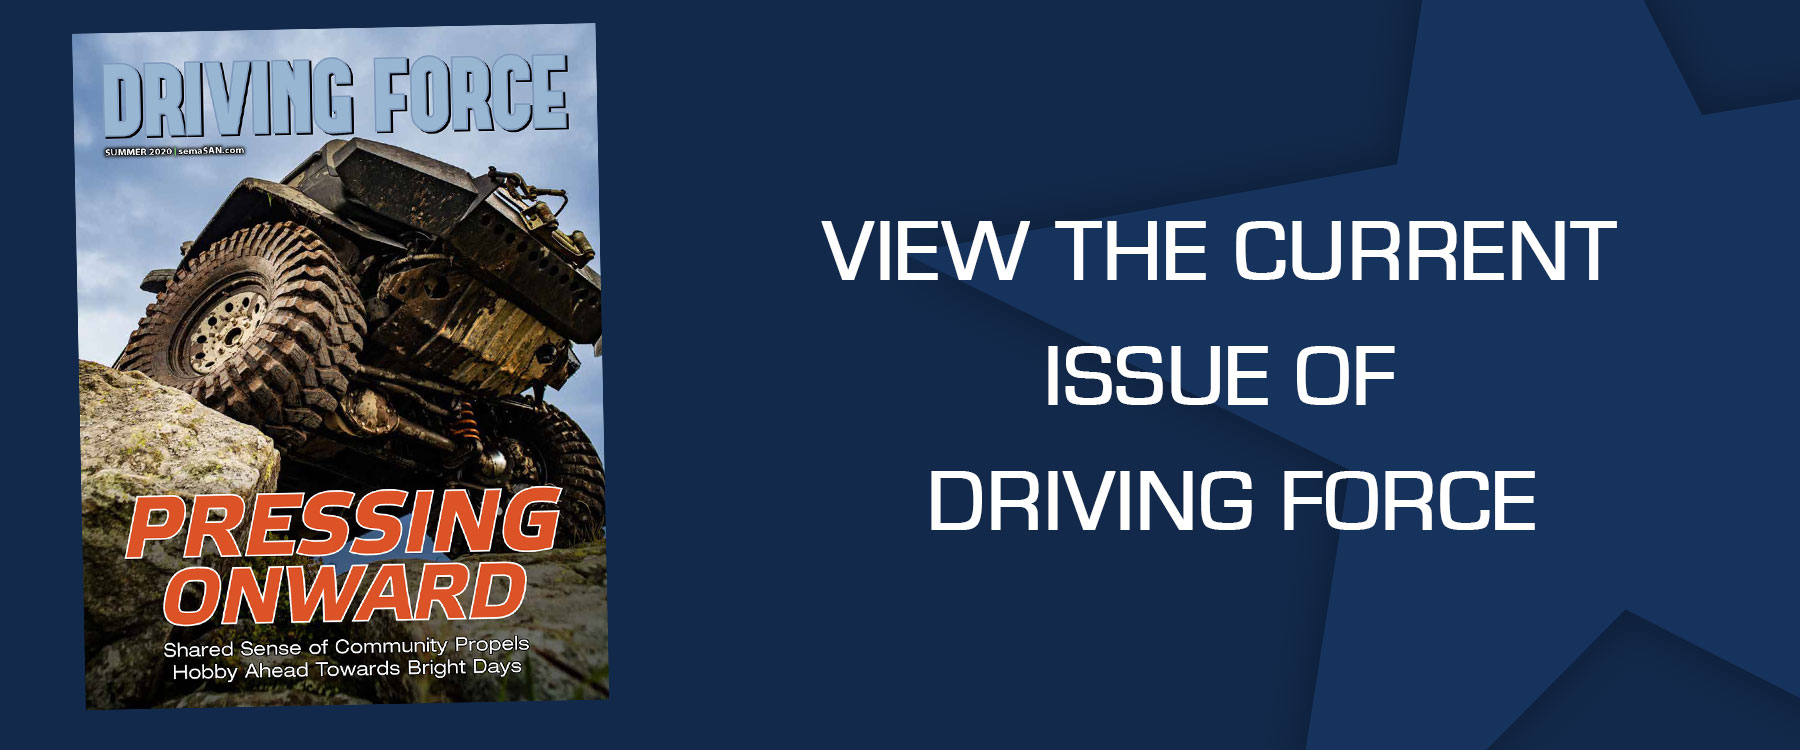 Driving Force Current Issue - Pressing Onward